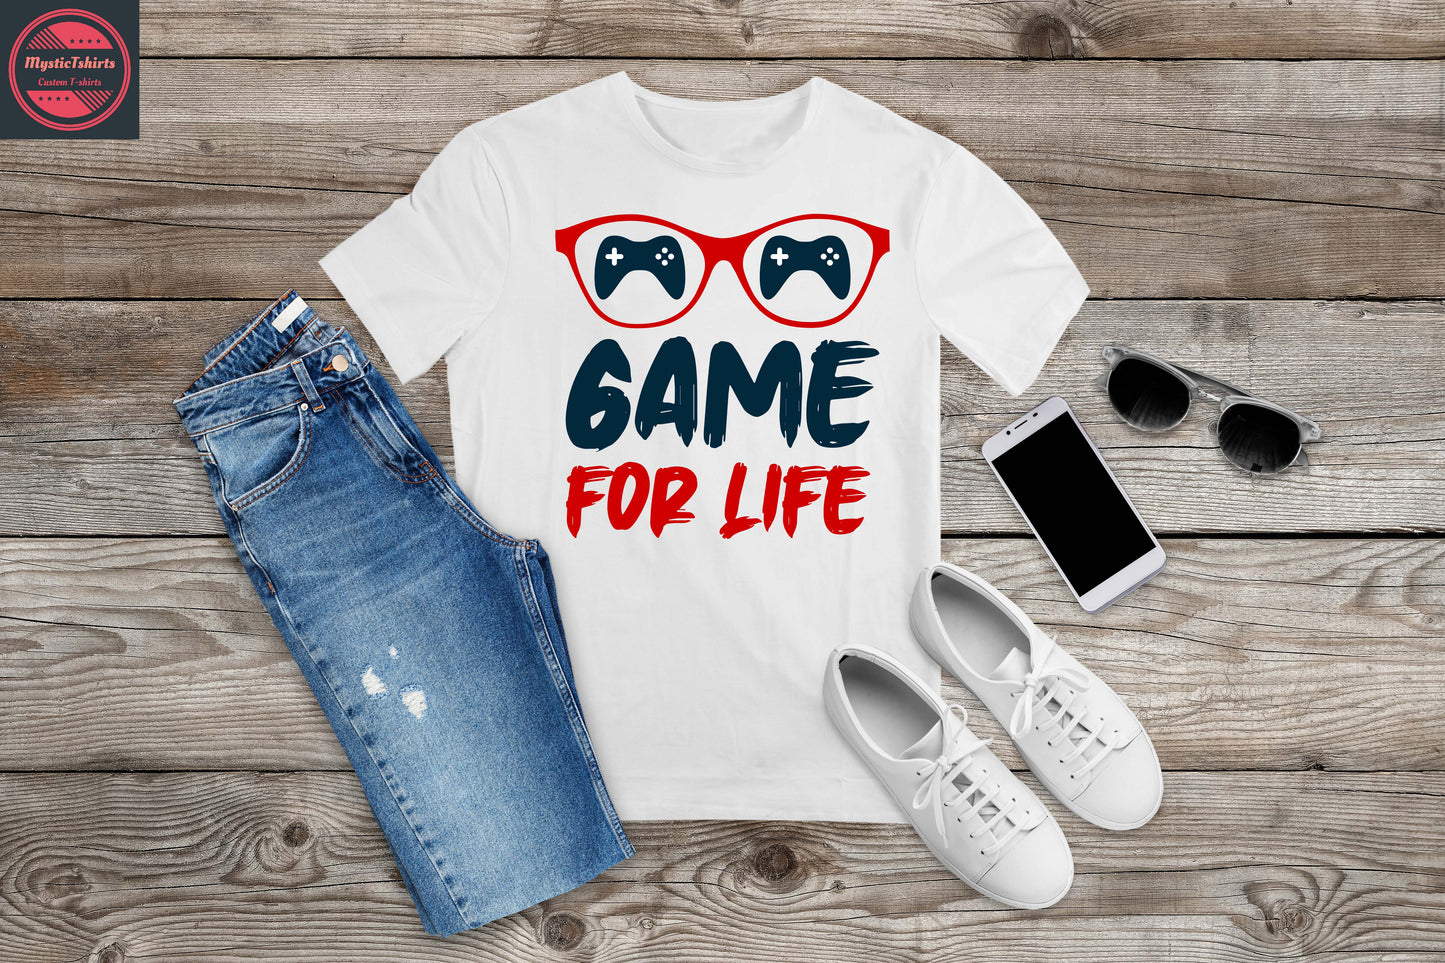 164. GAME FOR LIFE, Custom Made Shirt, Personalized T-Shirt, Custom Text, Make Your Own Shirt, Custom Tee